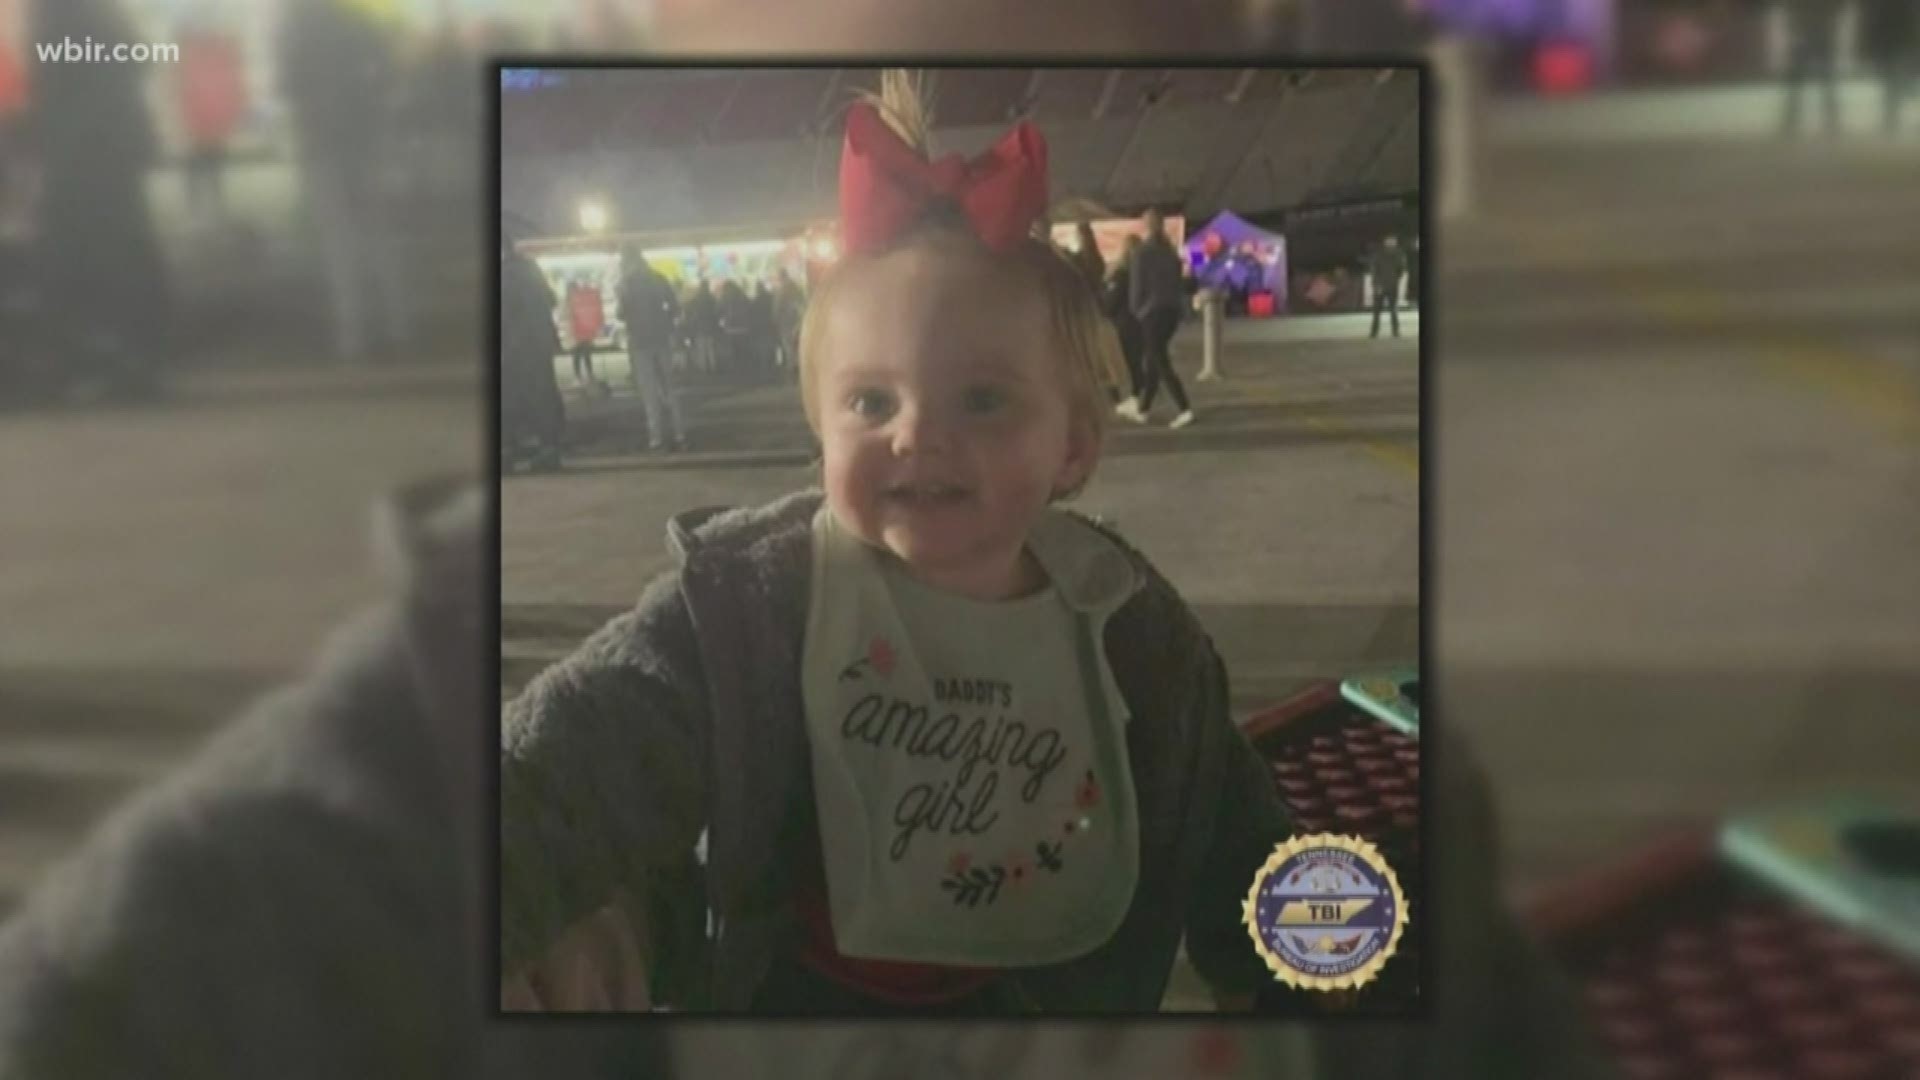 Authorities said there are a lot of questions surrounding an AMBER Alert in upper East Tennessee.